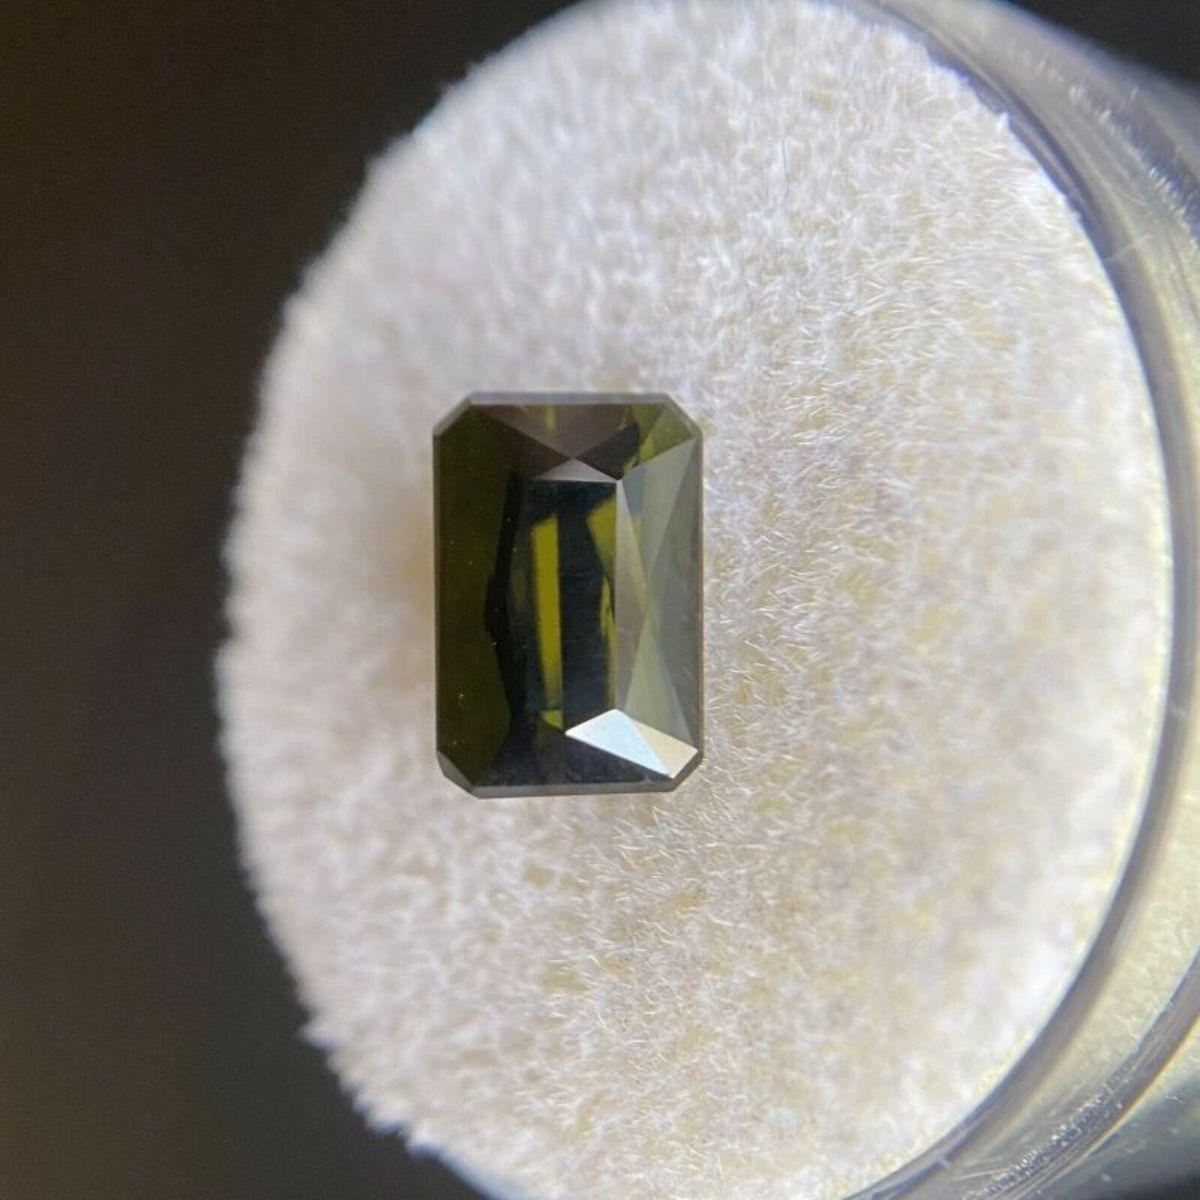 Deep Green Tourmaline 2.43ct Octagon Emerald Cut Loose Gem 9 x 6mm

Natural Deep Green Tourmaline Gemstone. 
2.43 Carat with a beautiful deep green colour and excellent clarity. Very clean stone with only some small natural inclusions visible when